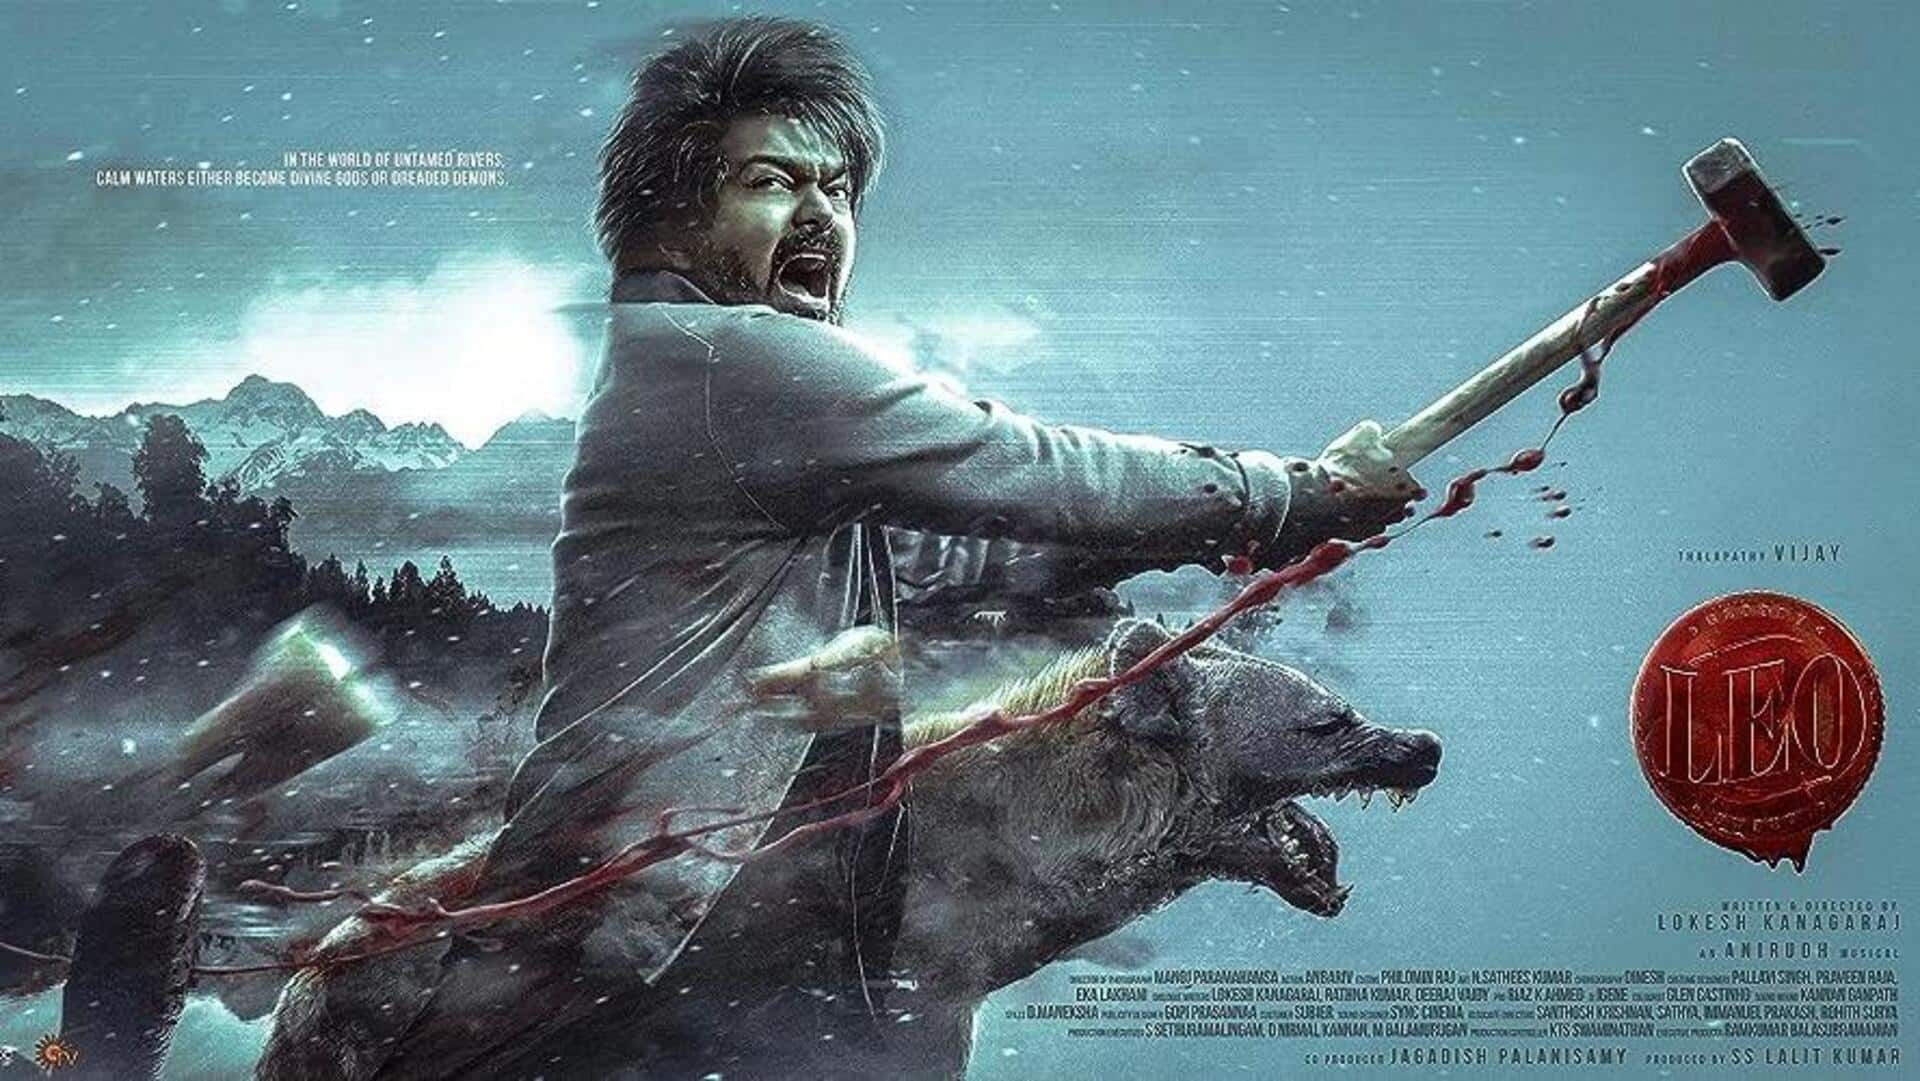 Vijay's 'Leo' to release in UK with zero cuts